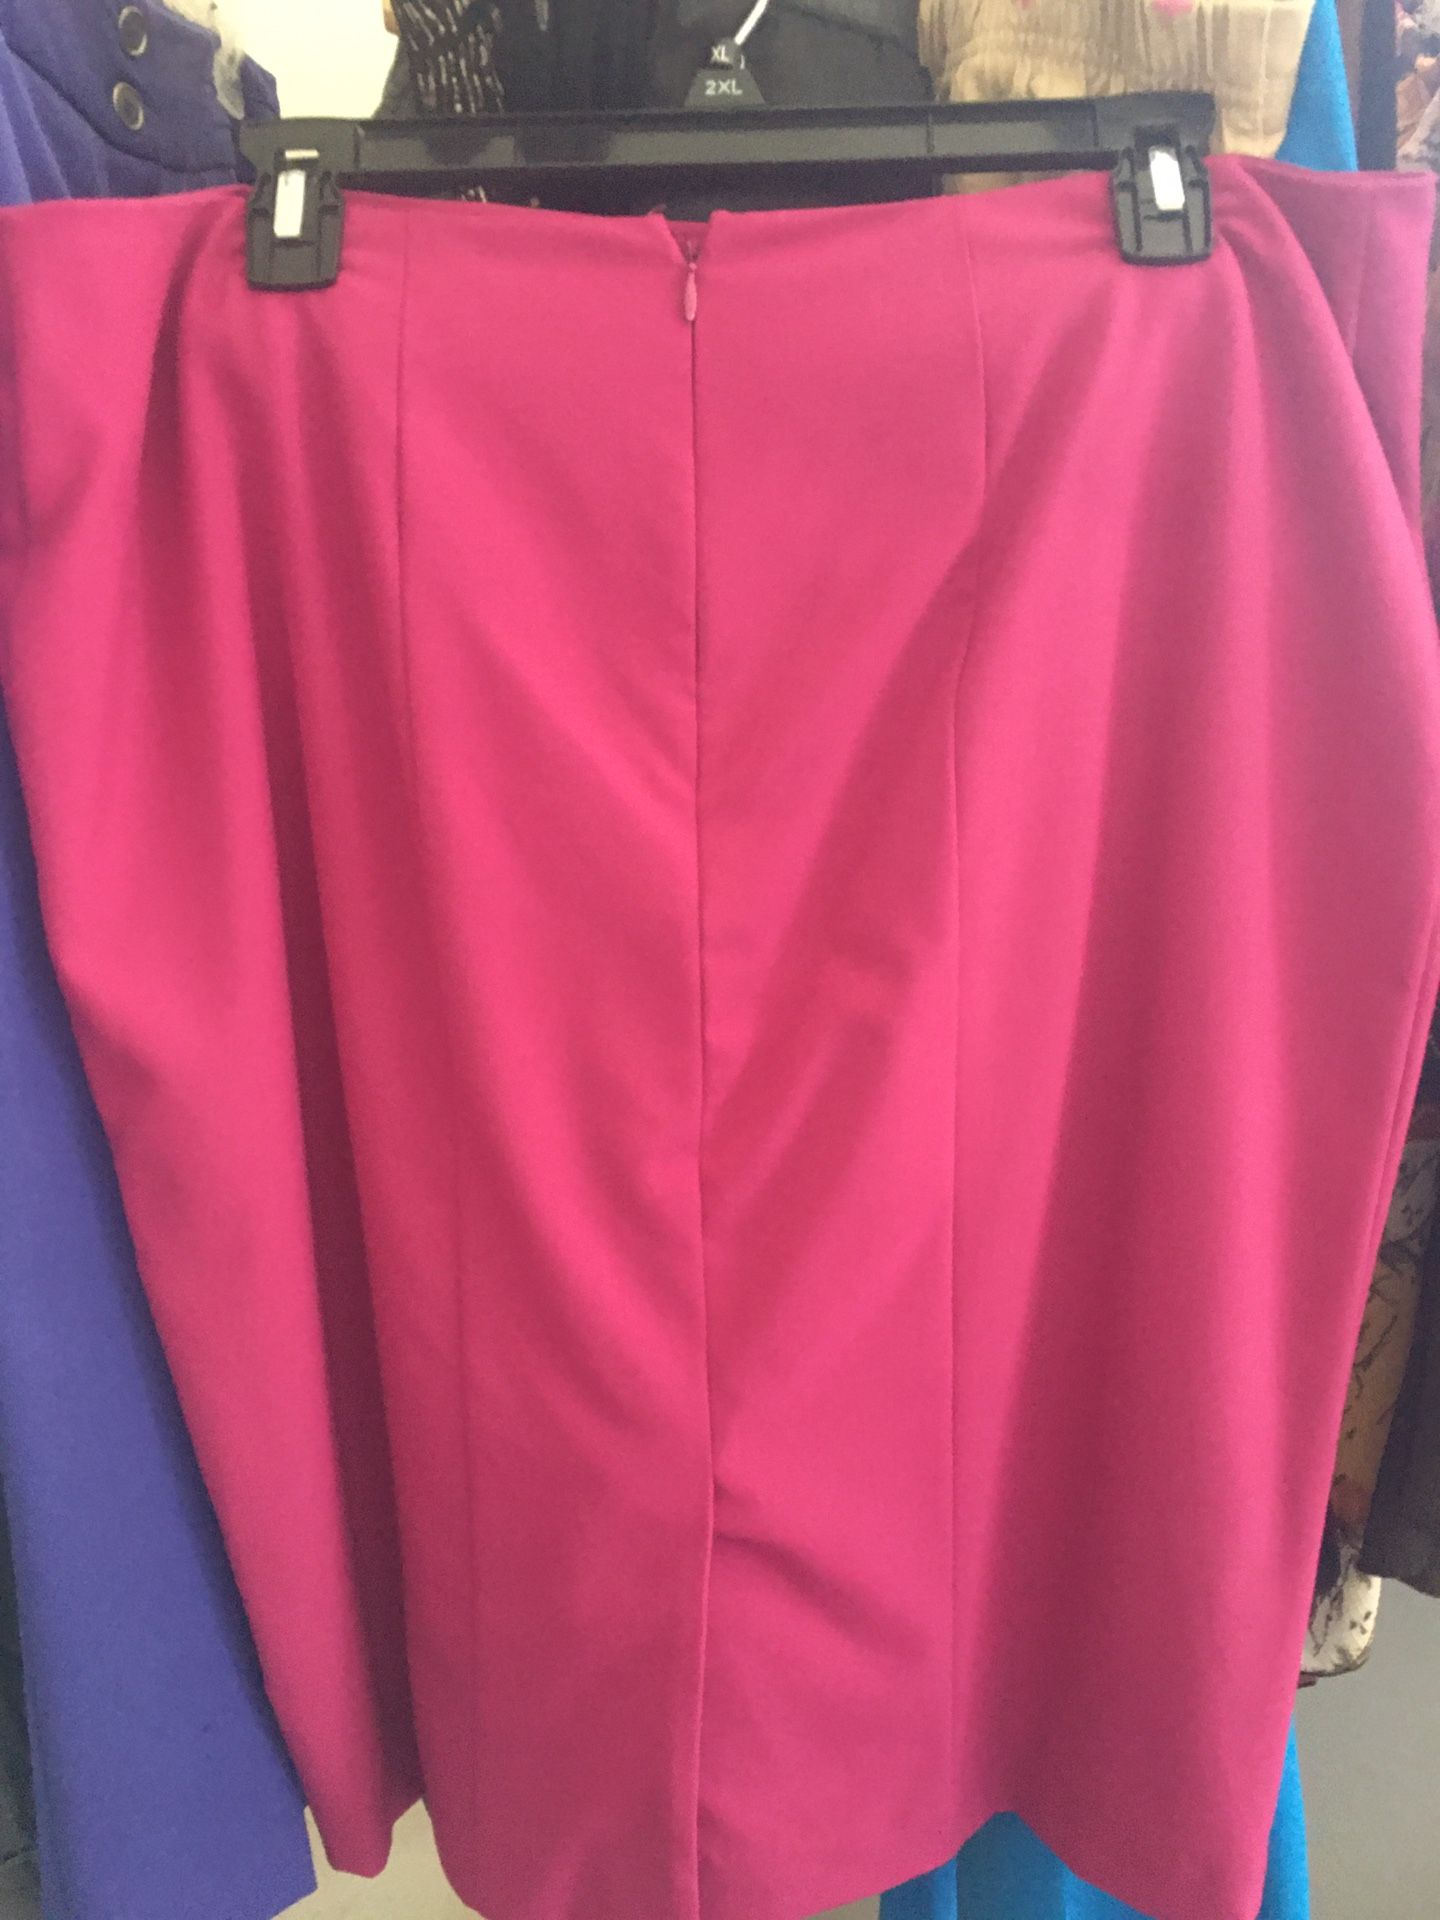 Anne Taylor hot pink skirt